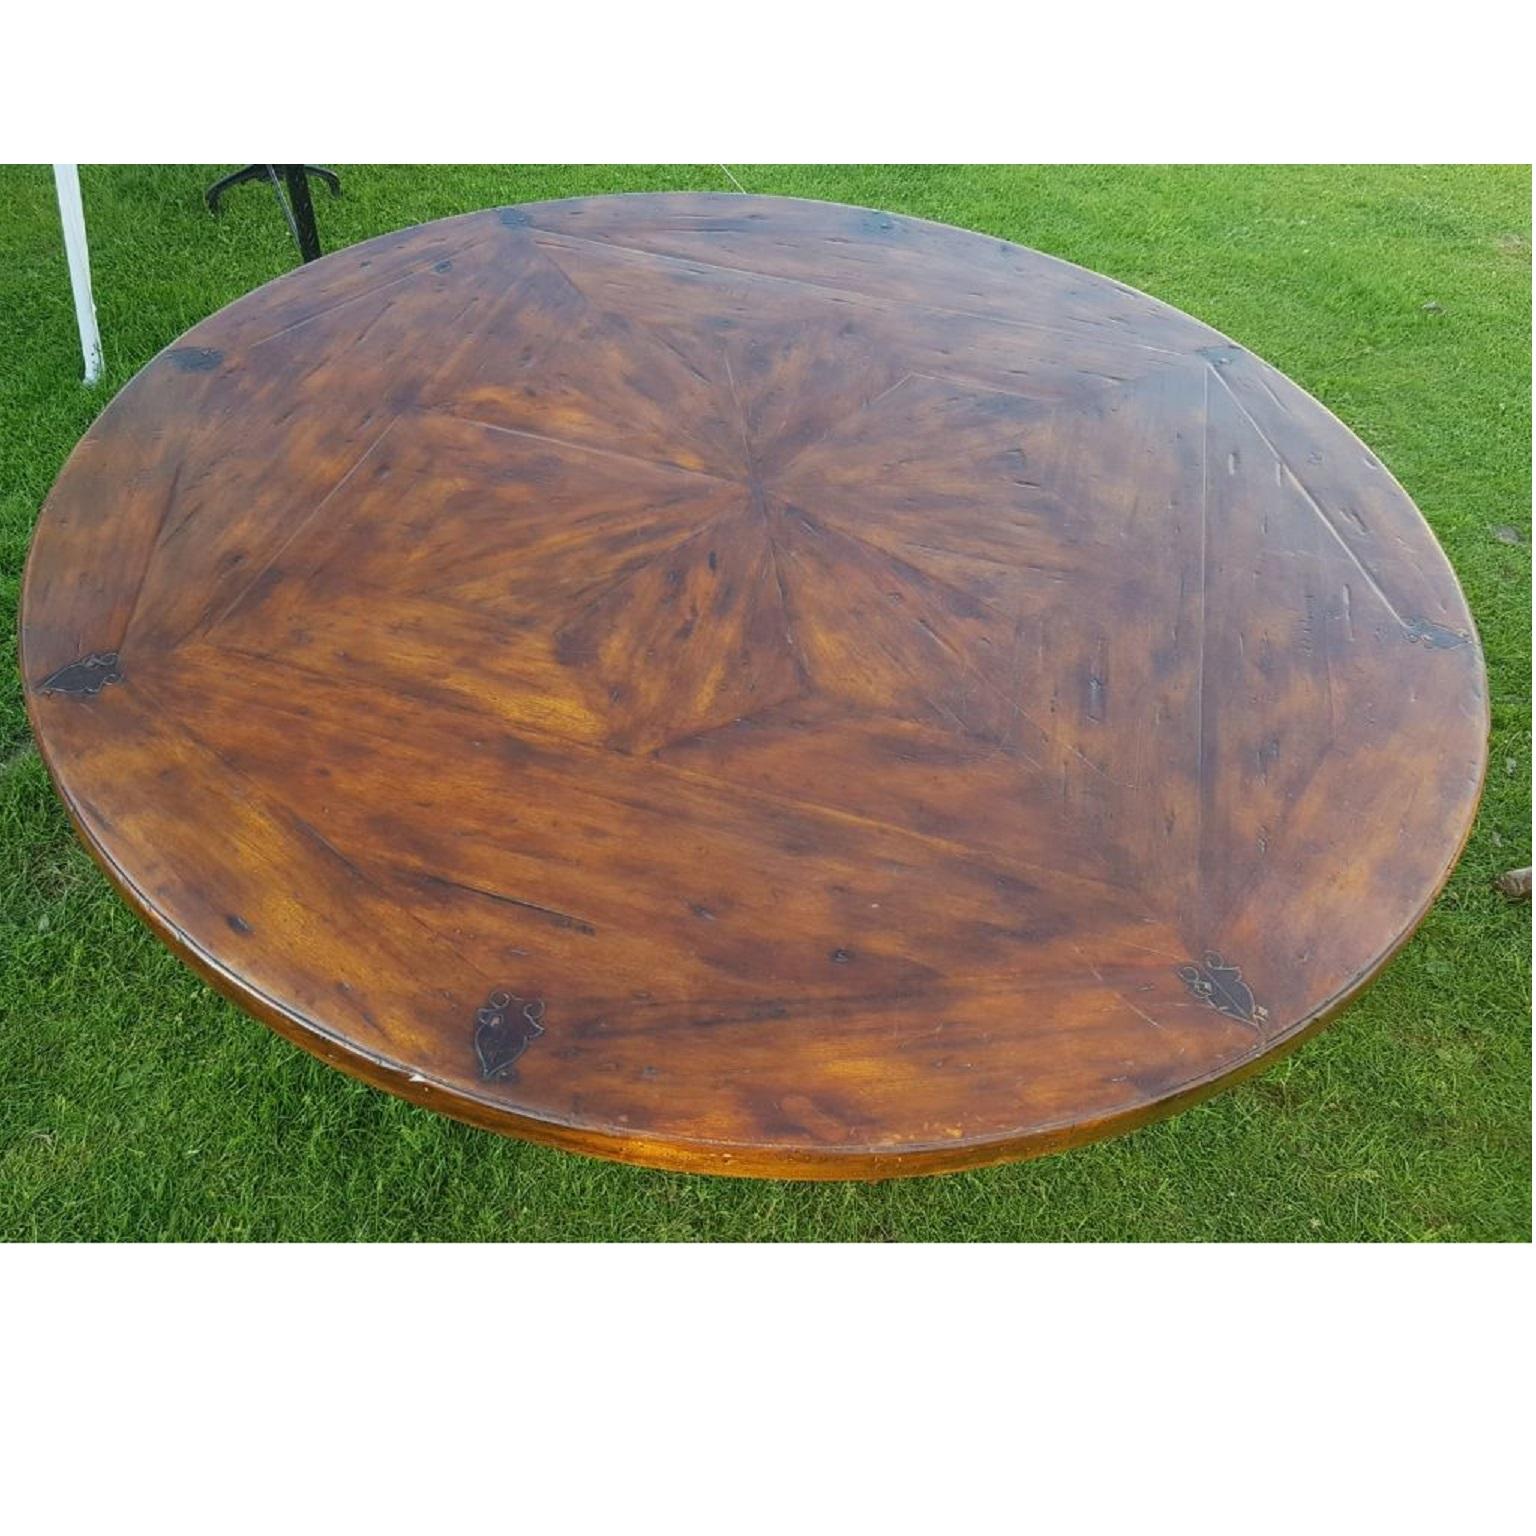 Theodore Alexander dining centre table in the style of a 17th century Stuart table

An antiqued mahogany wood circular dining or kitchen table, the top with stellar parquetry above four baluster turned supports, on and ‘X’ base. In the style of a